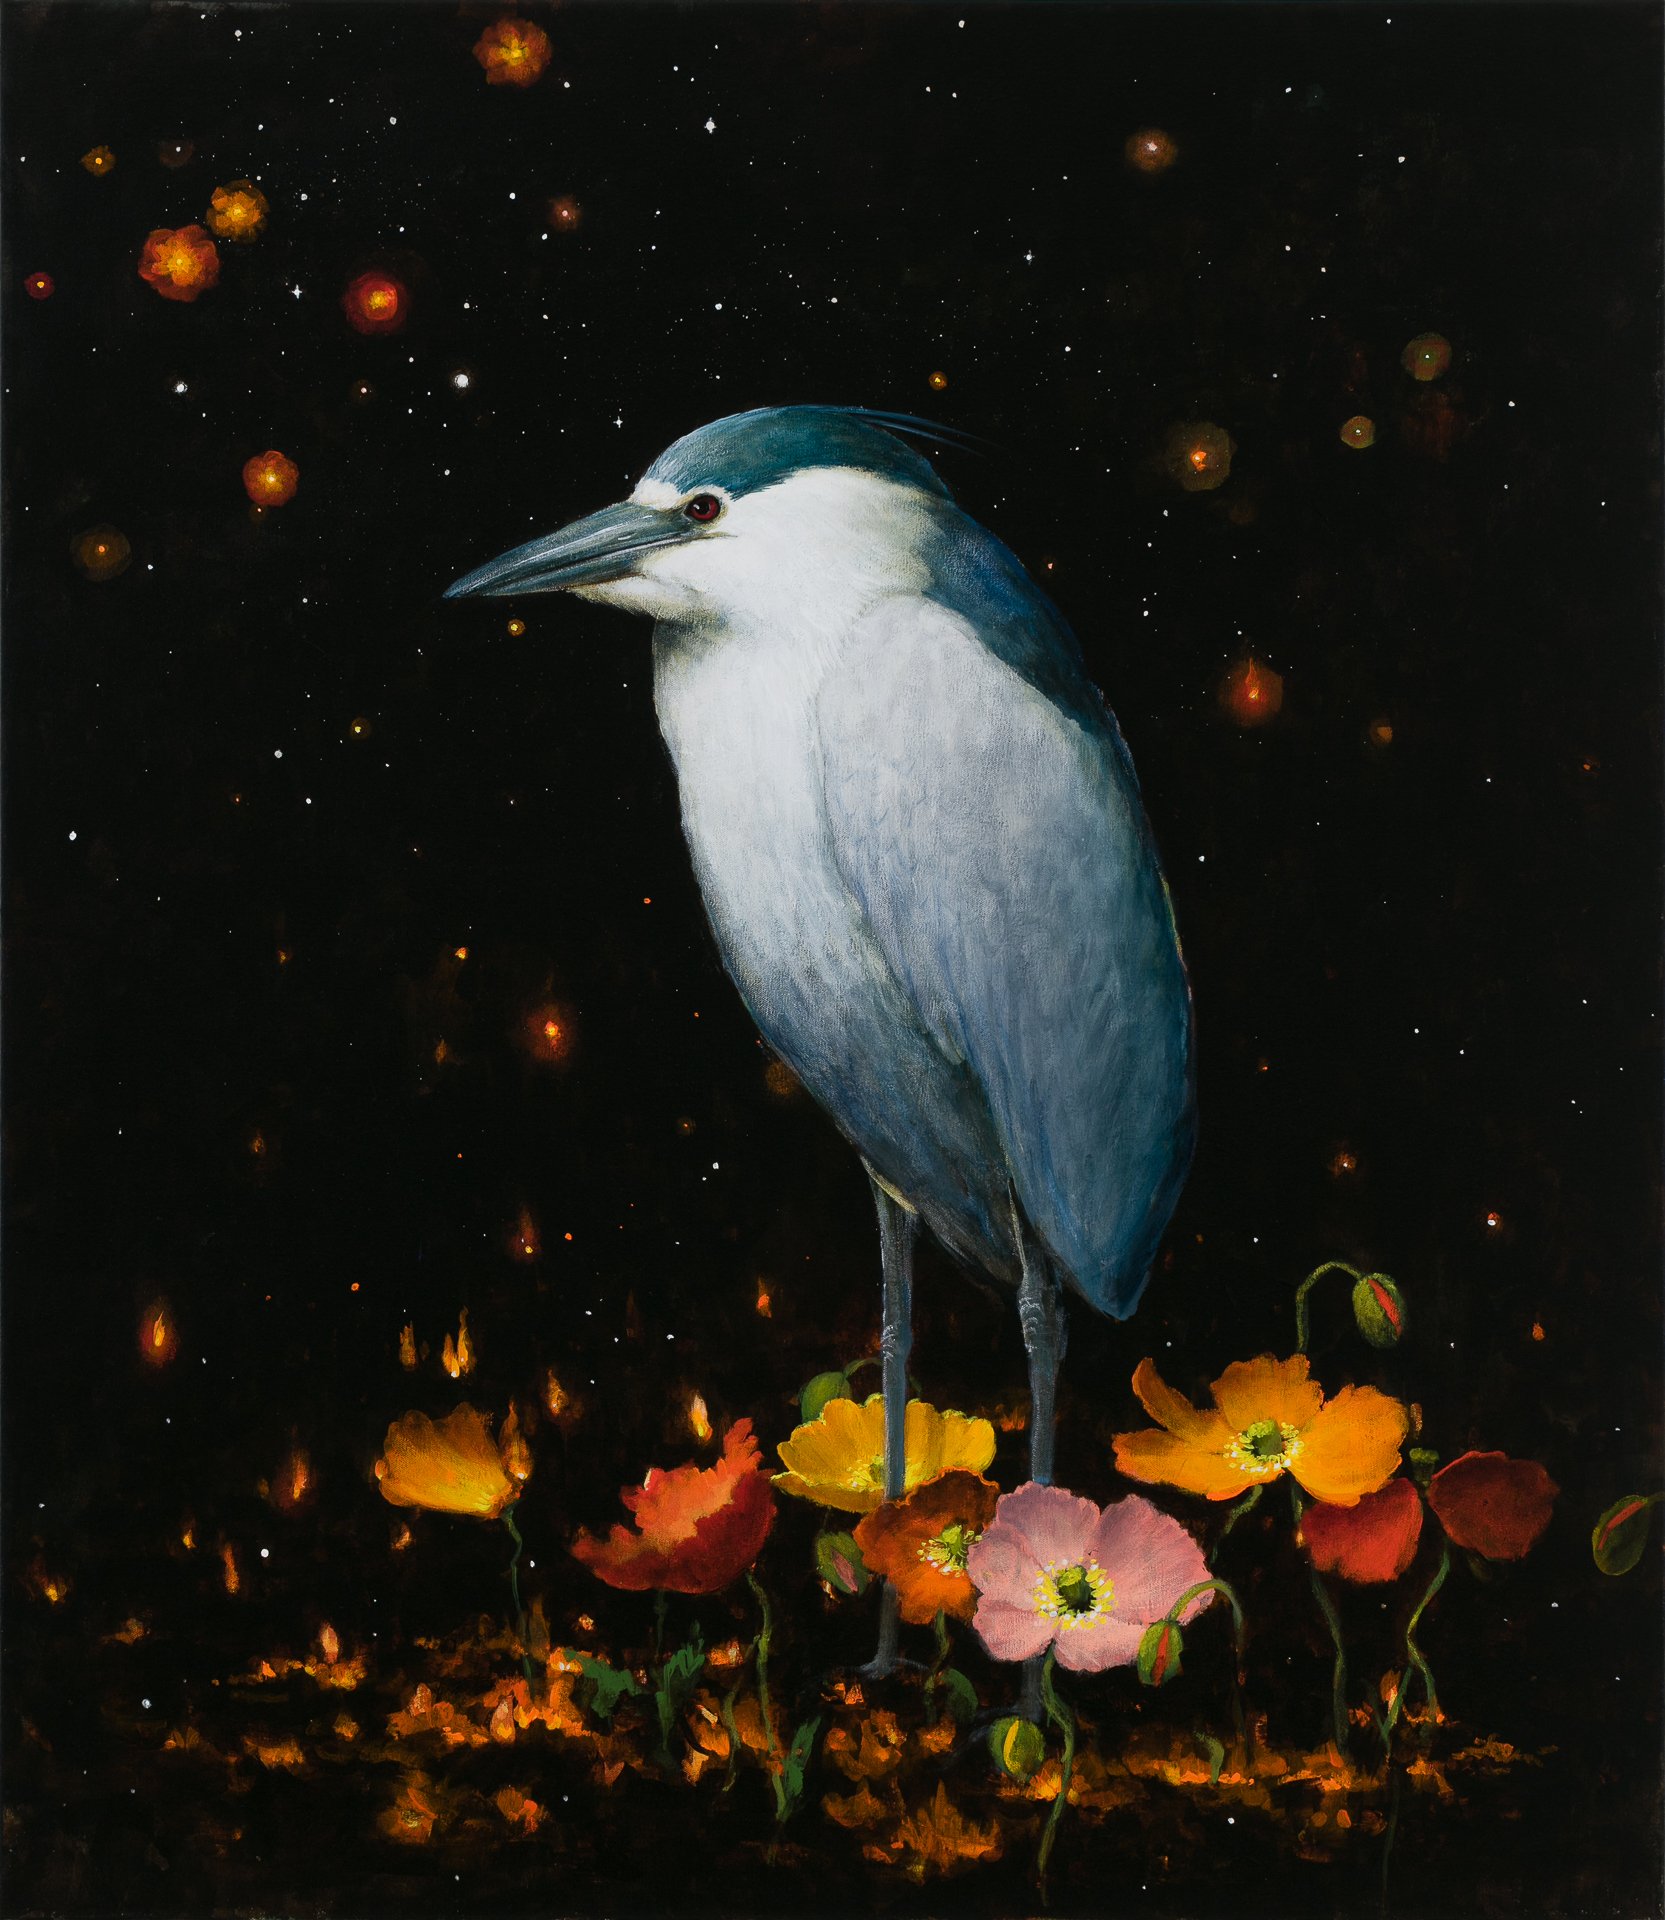 Night Heron With Universe and Poppies, 48"x42", acrylic on canvas